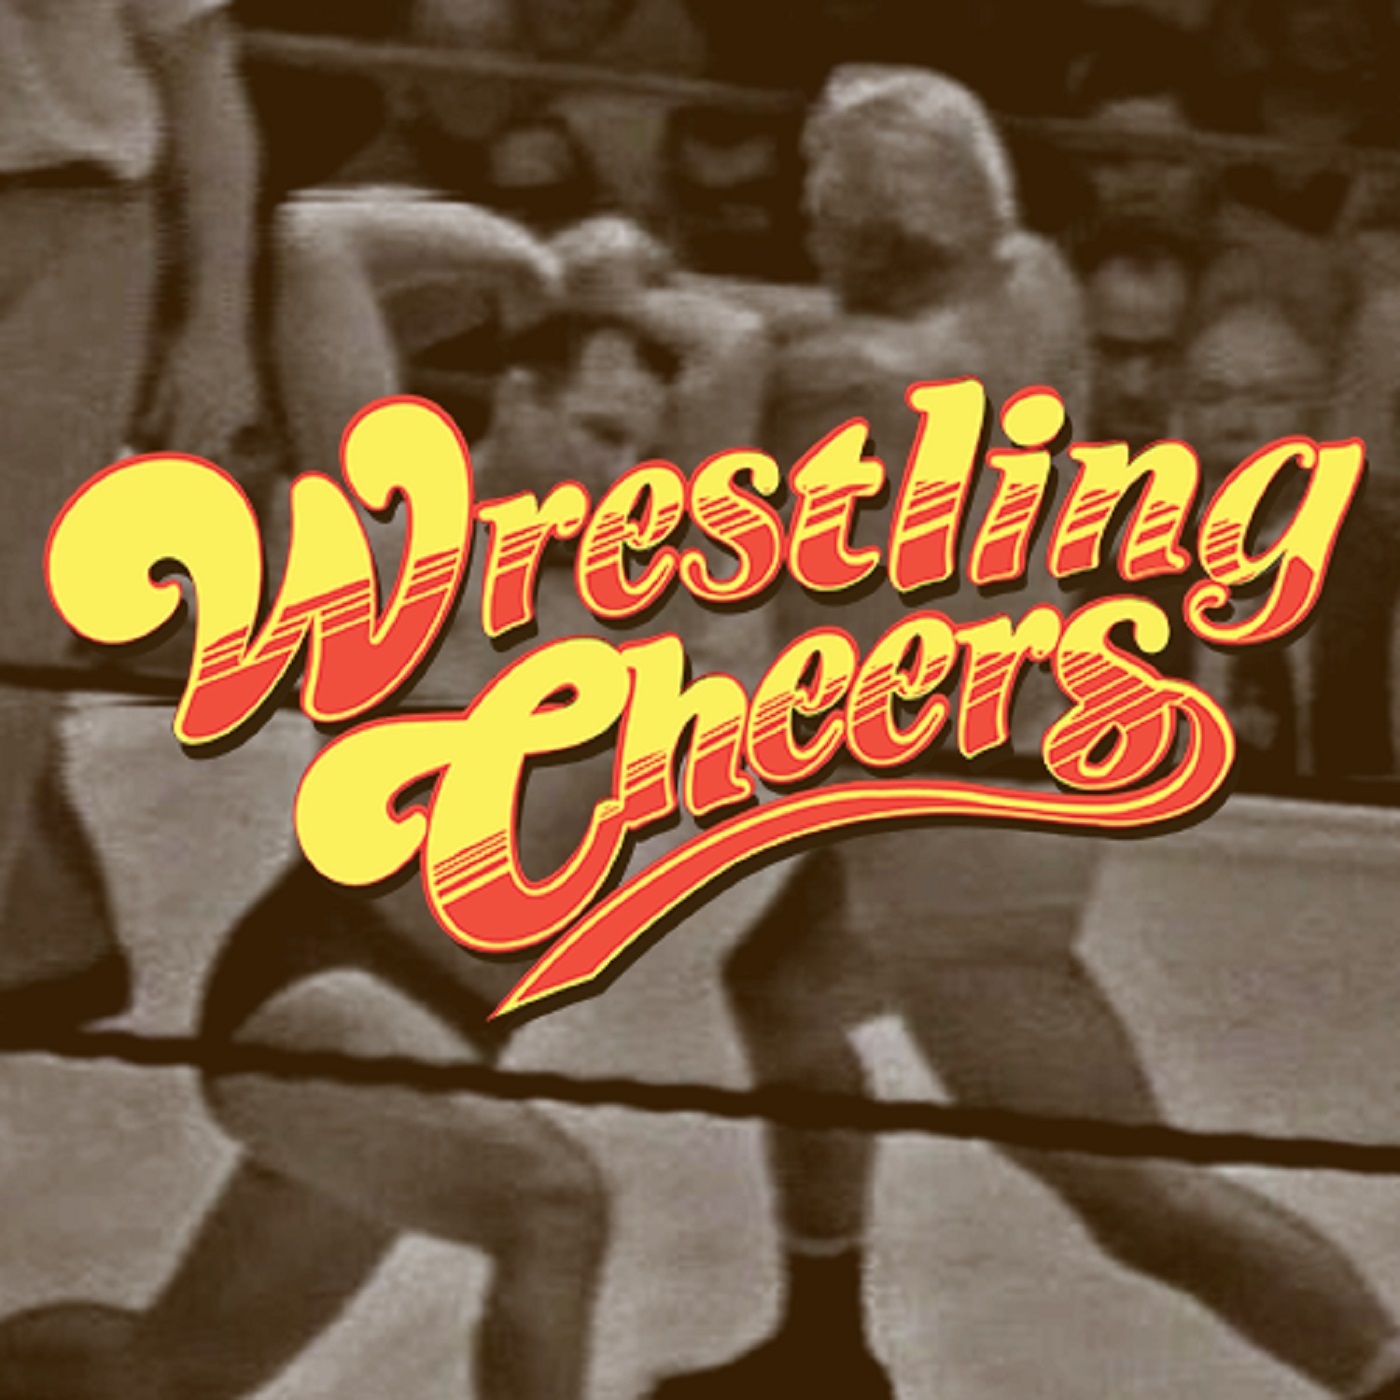 Wrestling Cheers- Episode 62: “O-H-I-OCW Update and Interview with Fantone